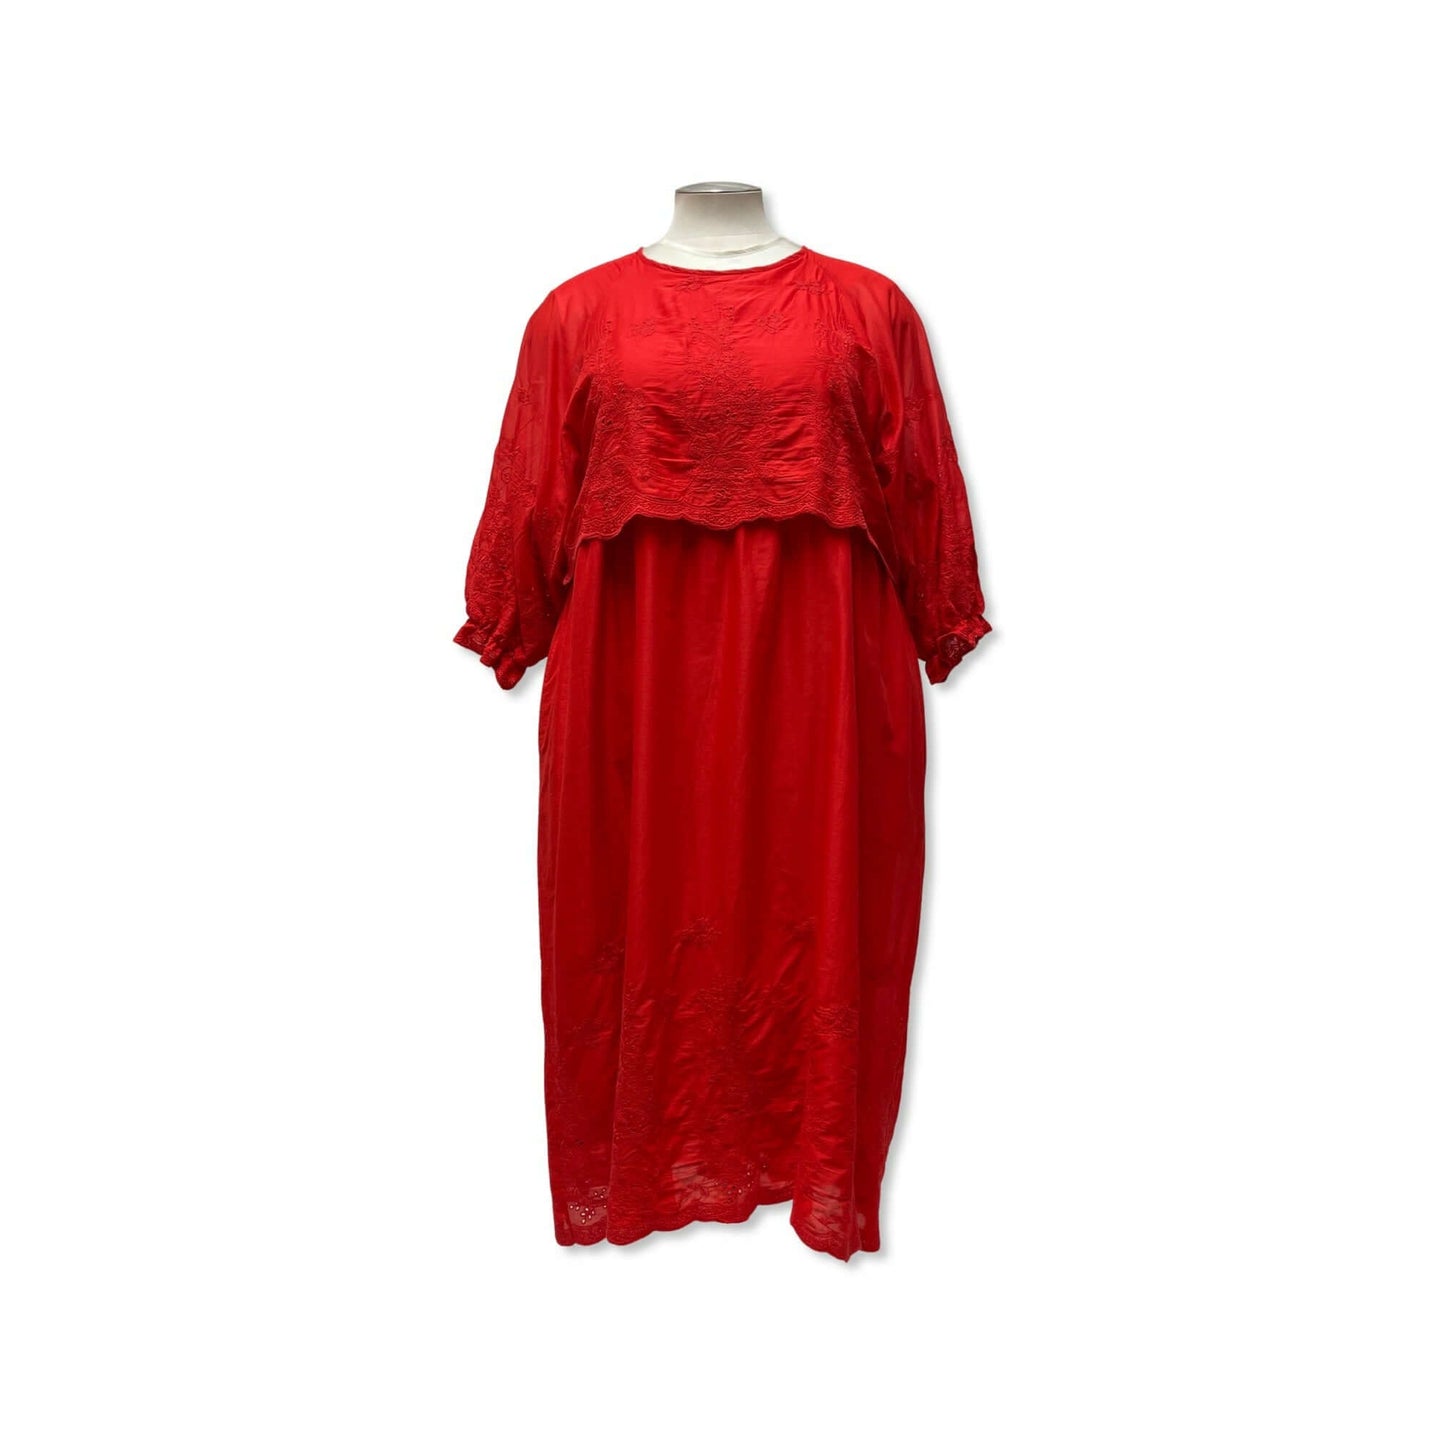 Bloom Clothing NZ,BRING ON SUMMER DRESS - Red,$289.00,